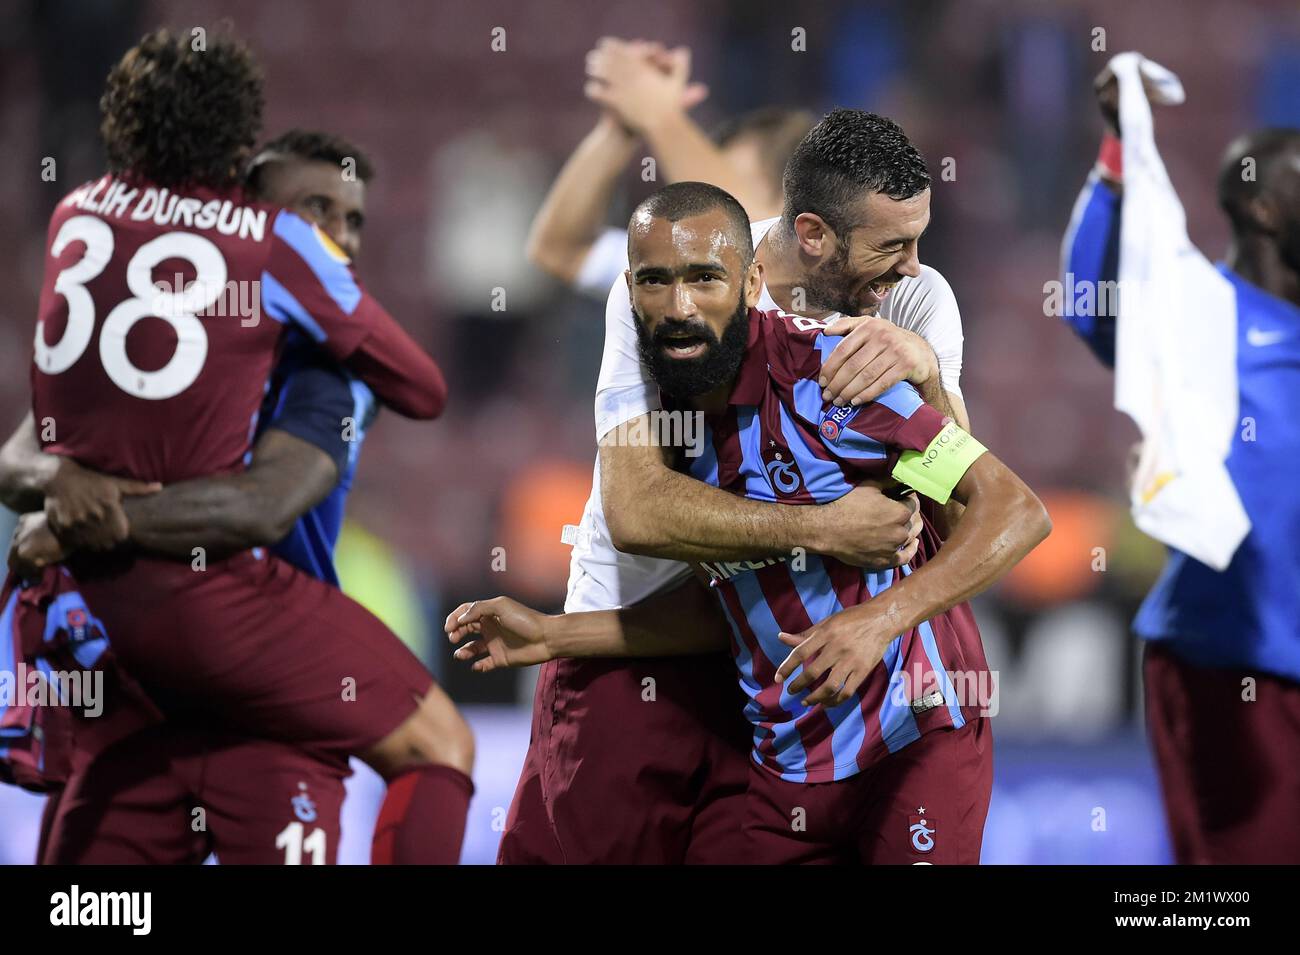 20141023 - TRABZON, TURKEY: Trabzonspor's Jose Bosingwa and Trabzonspor's Essaid Belkalem celebrate after winning a game between Turkish club Trabzonspor AS and Belgian soccer team KSC Lokeren OVL in the Huseyin Avni Aker Stadium in Trabzon, Thursday 23 October 2014. It is the third day of the group stage of the UEFA Europa League competition, in group L. BELGA PHOTO YORICK JANSENS Stock Photo